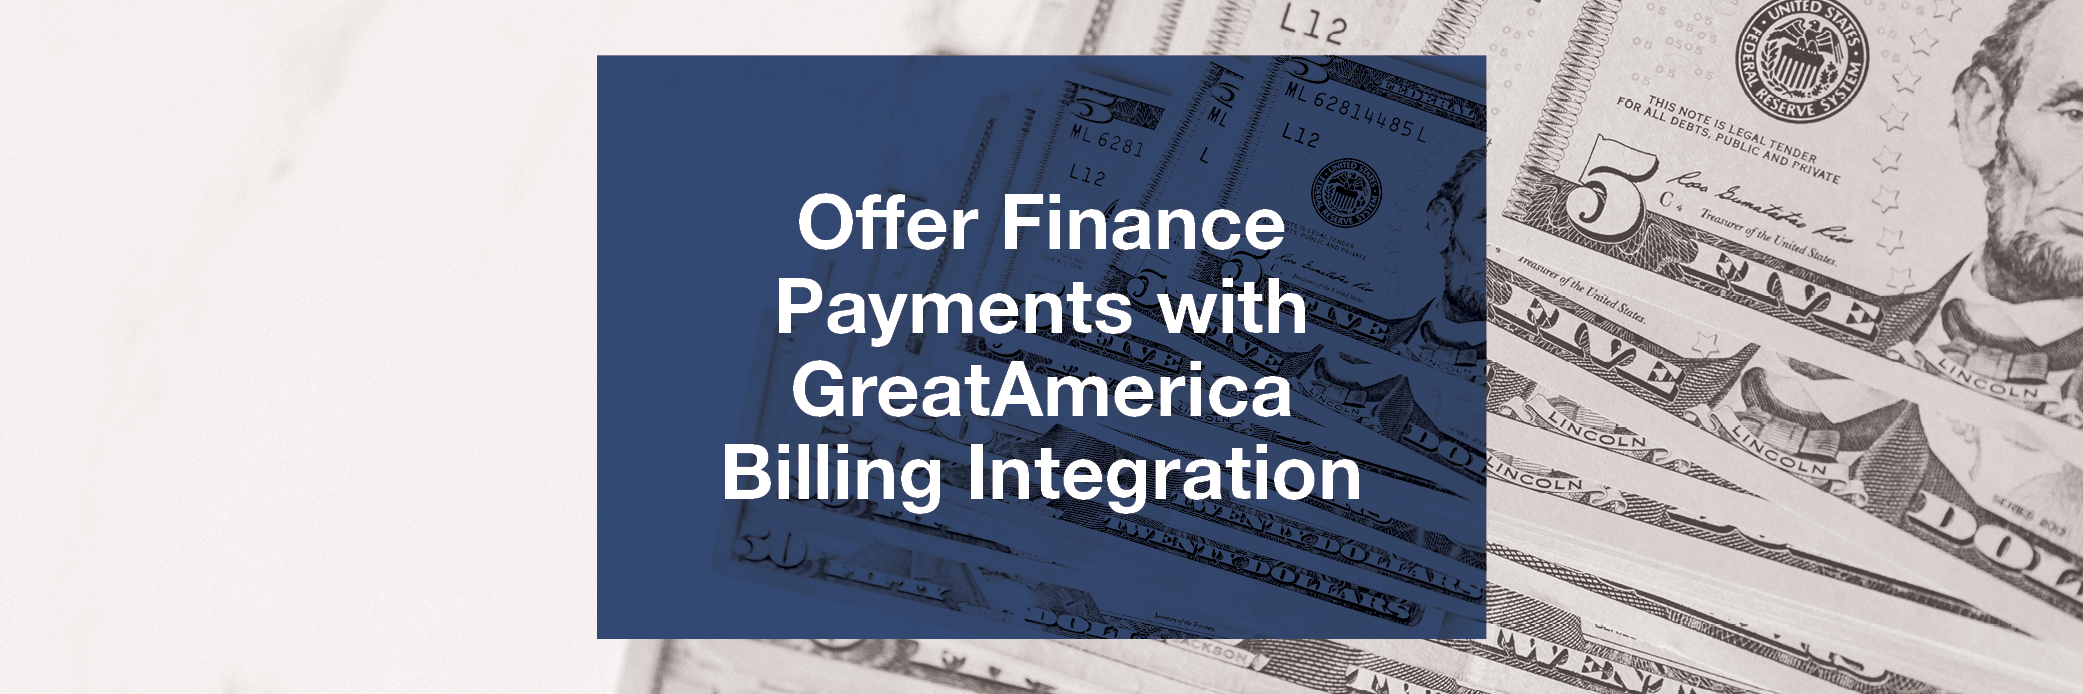 Offer Finance Payments with GreatAmerica Billing Integration